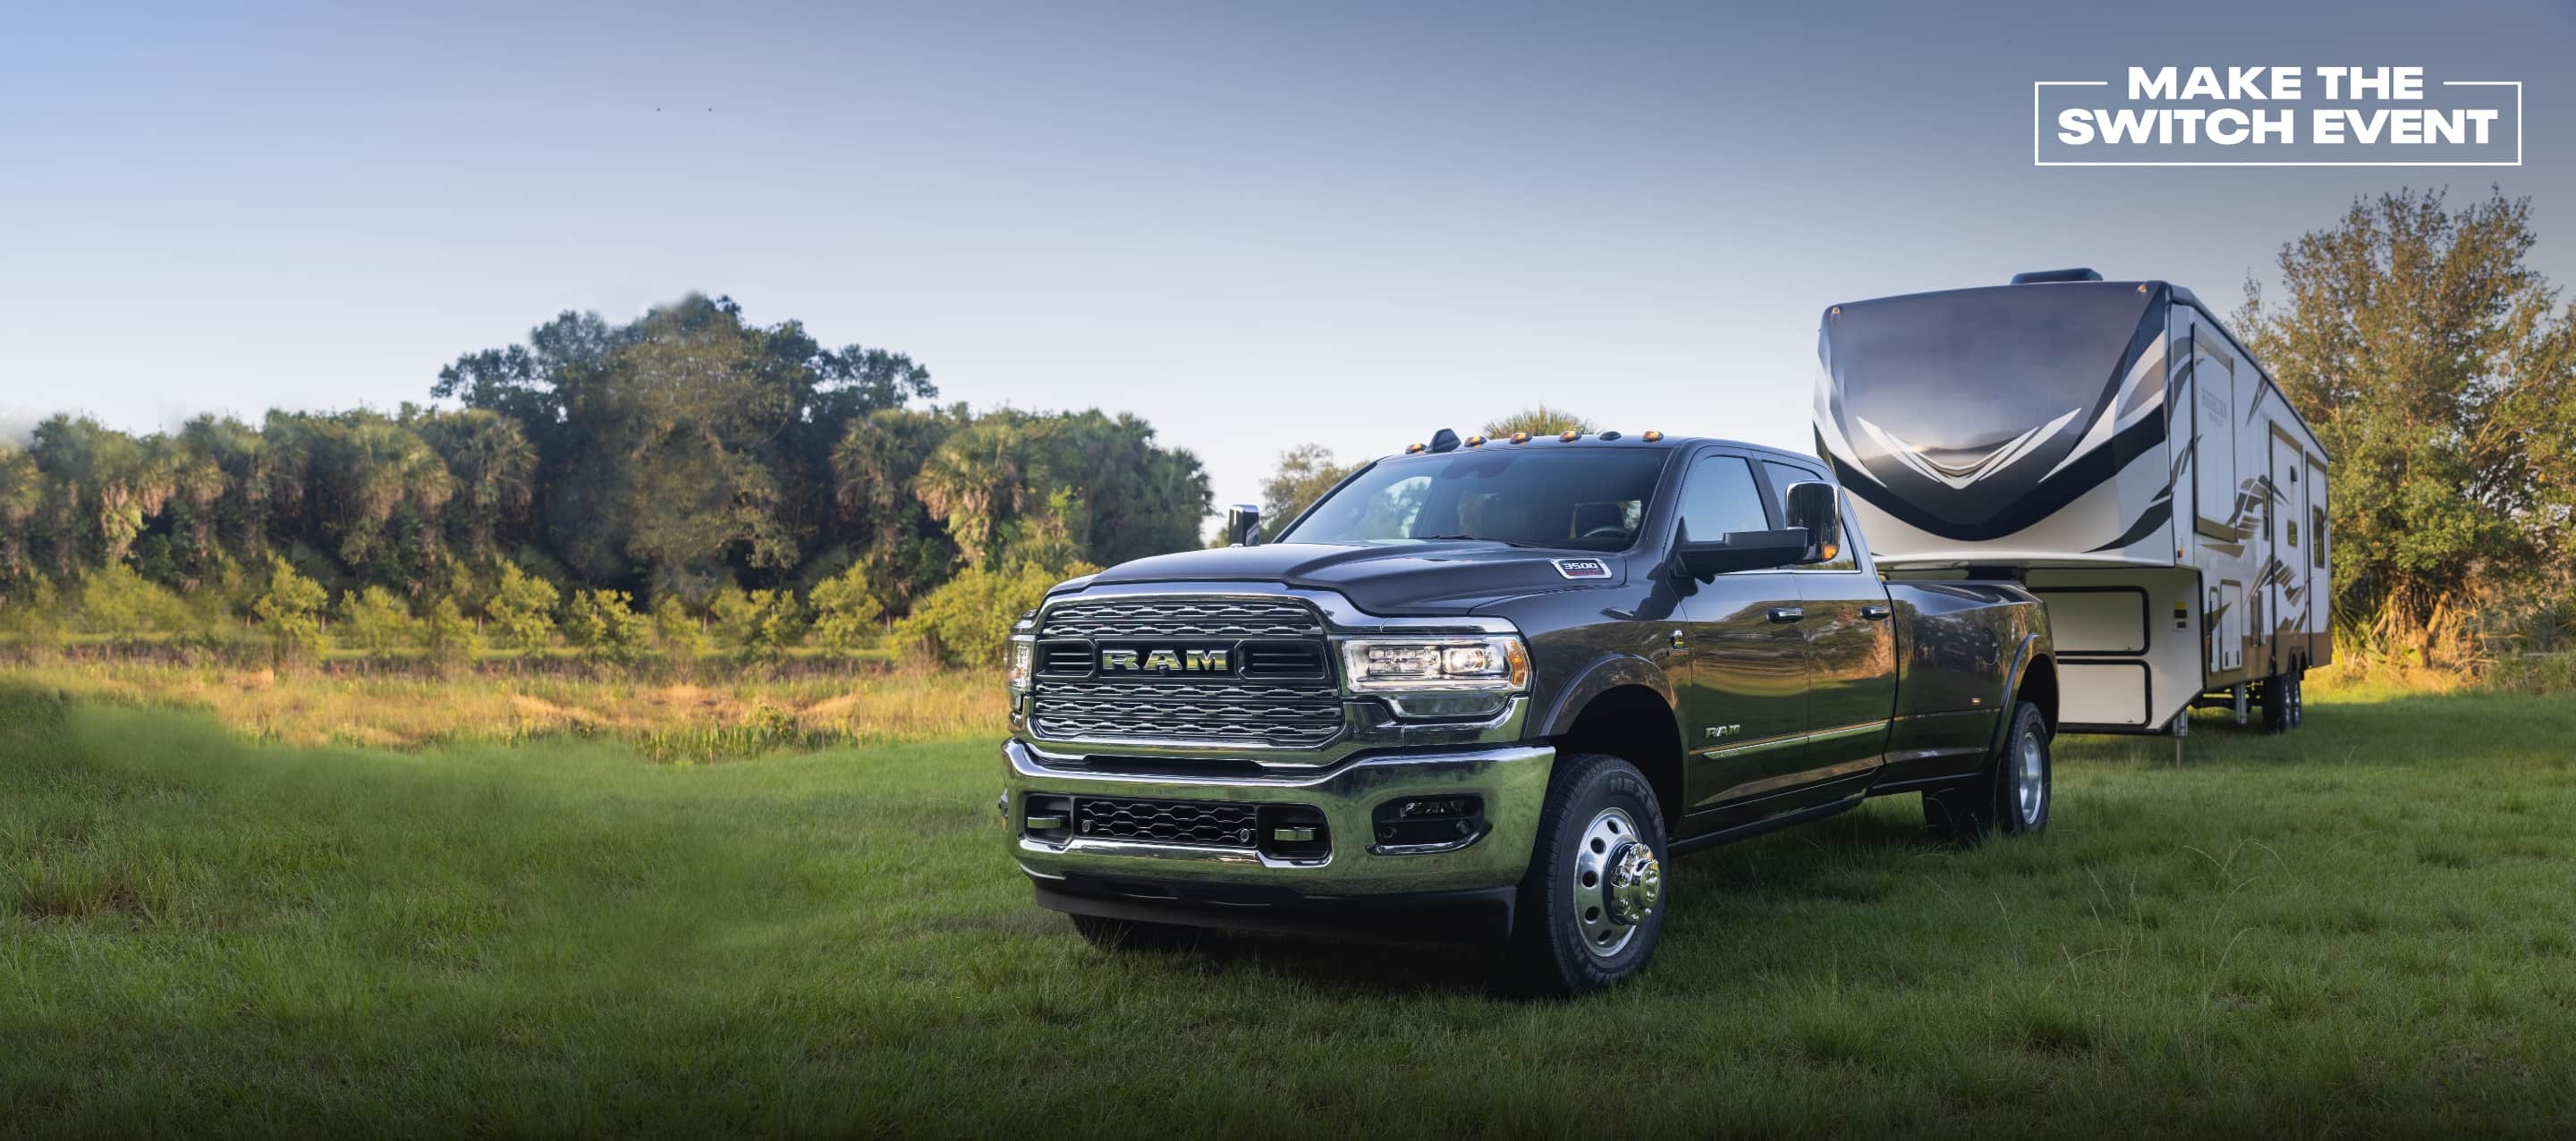 A 2022 Ram 3500 Limited parked on grass, towing a large travel trailer. Make the Switch Event logo.